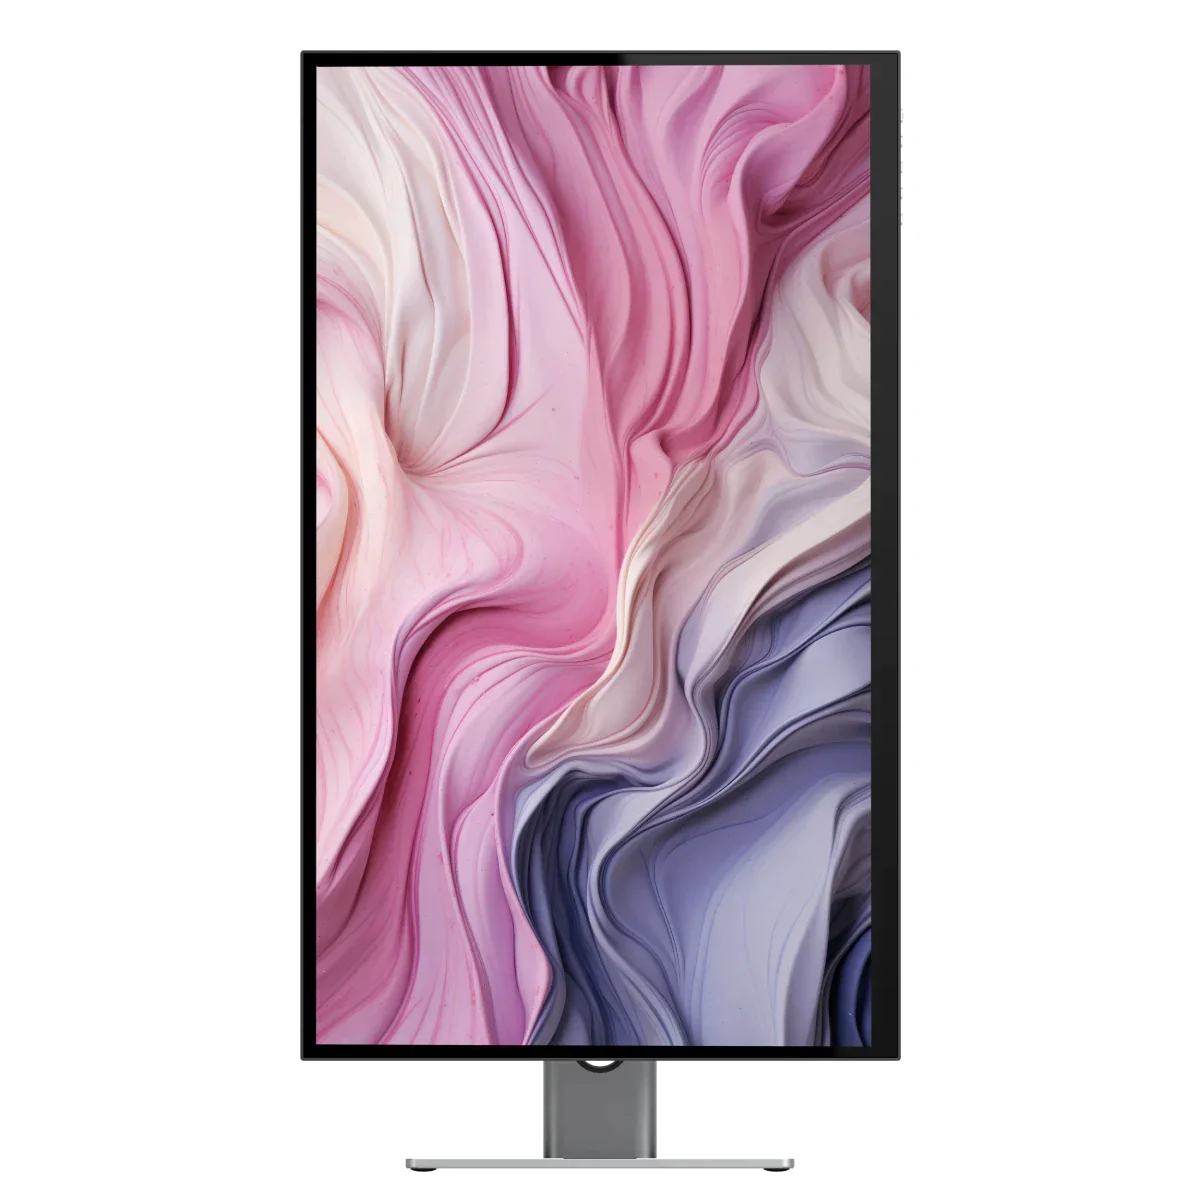 CLARITY 27” UHD 4K Monitor + Clarity Pro Touch 27" UHD 4K Monitor with 65W PD, Webcam and Touchscreen